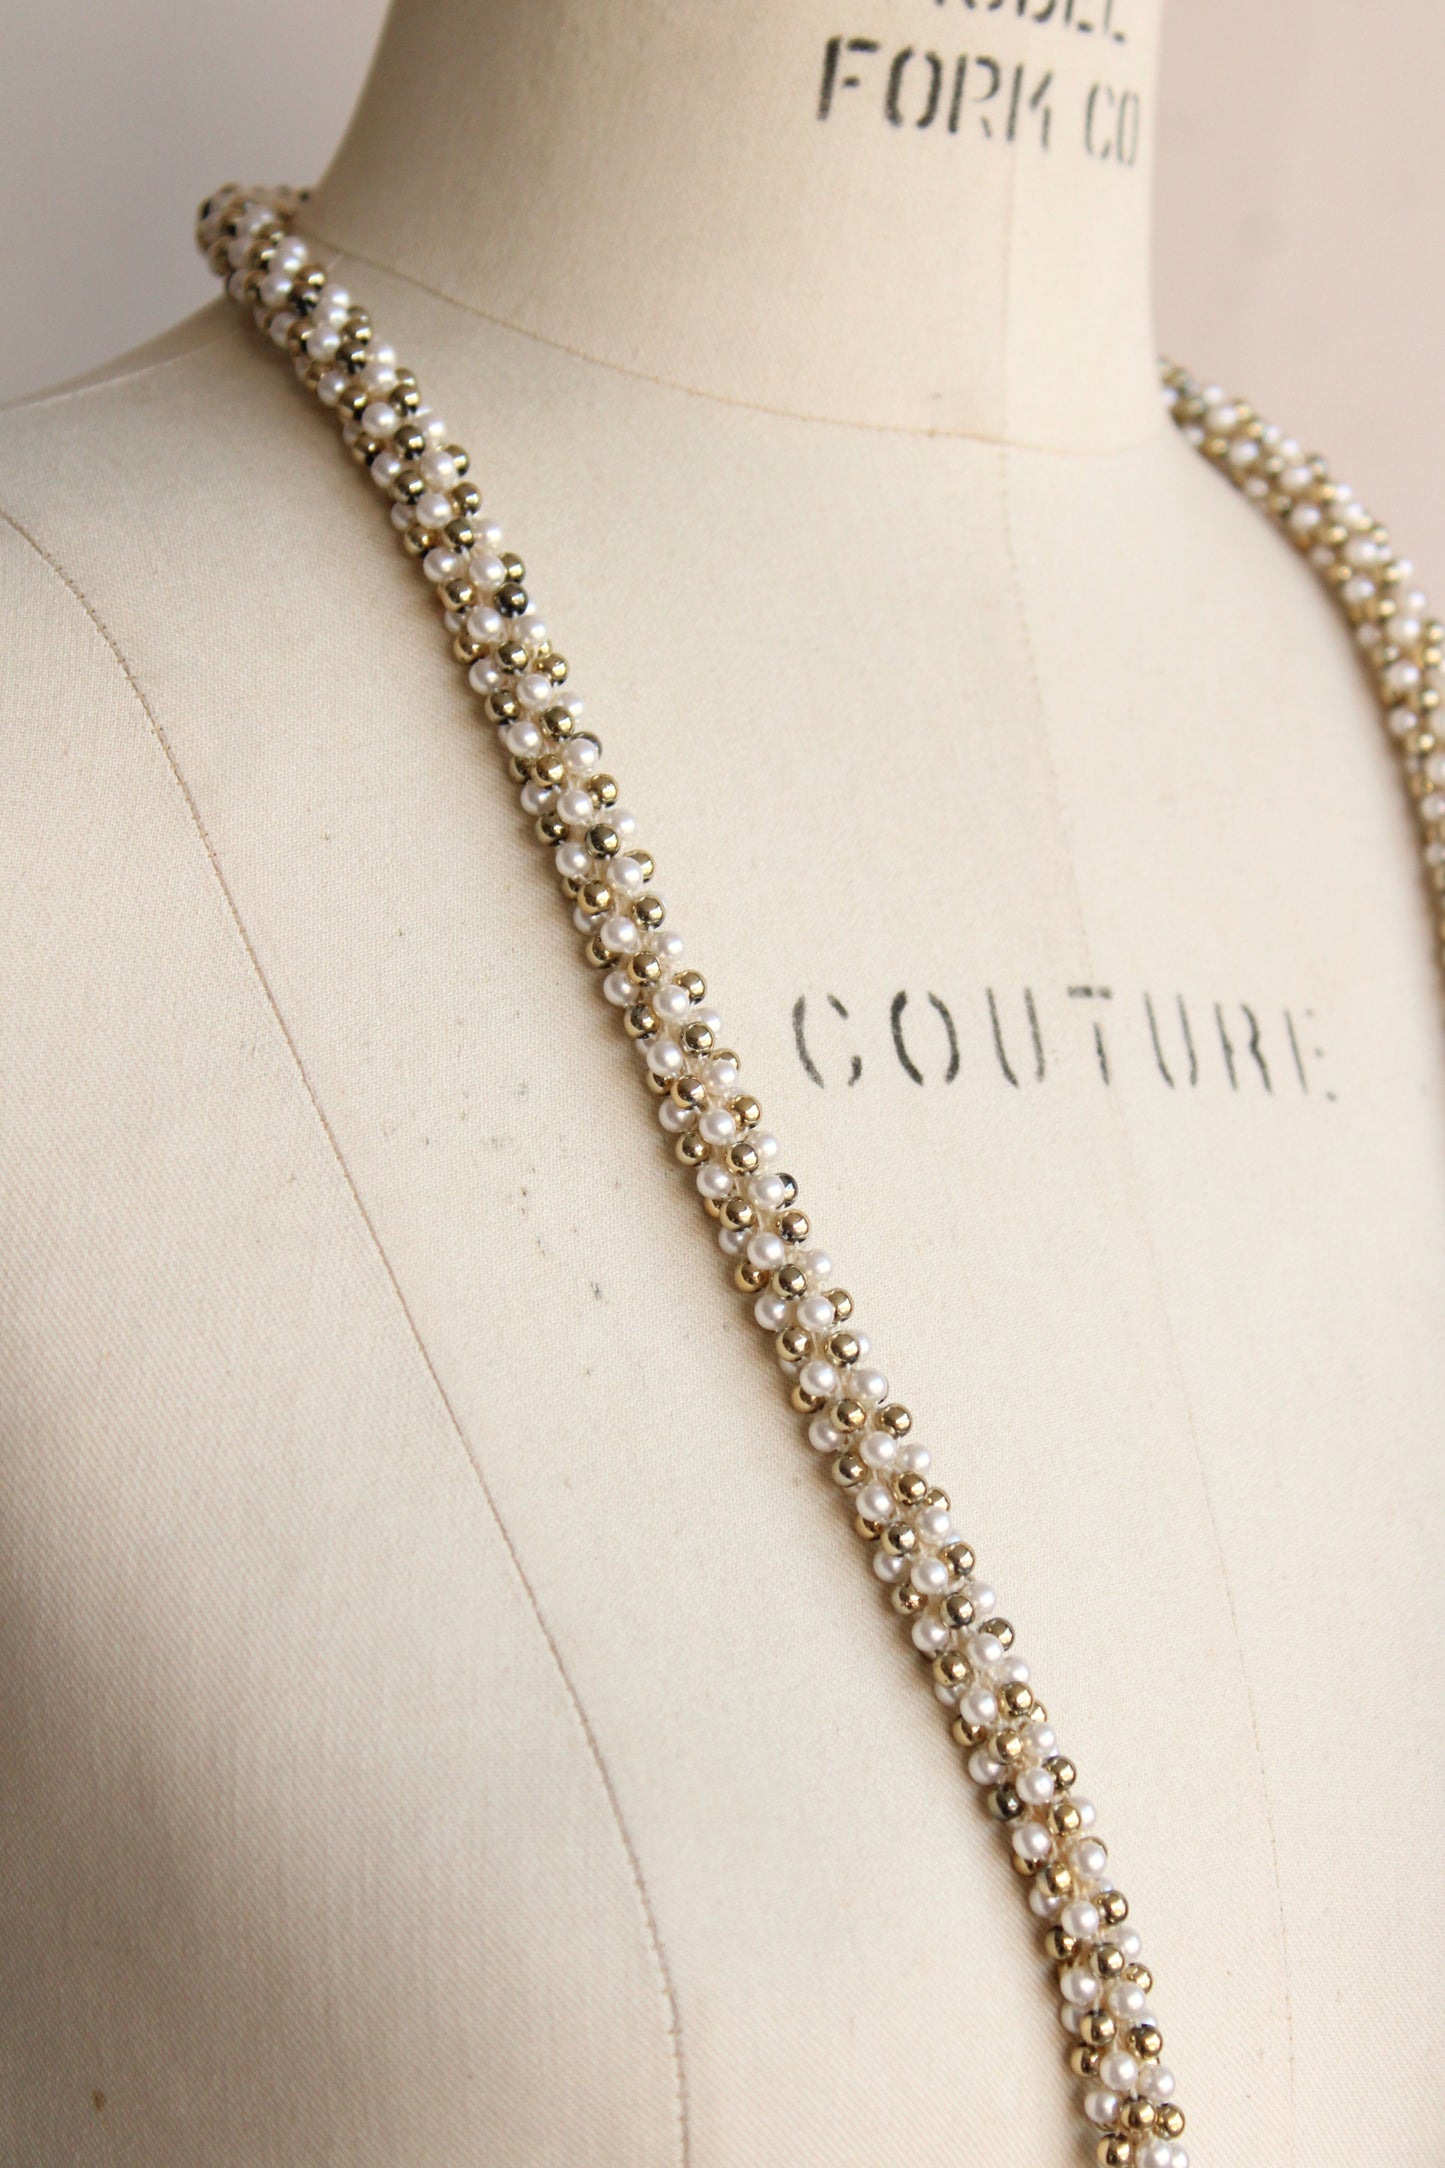 Vintage 1950s 1960s Twisted Six Strand Faux Pearls Necklace